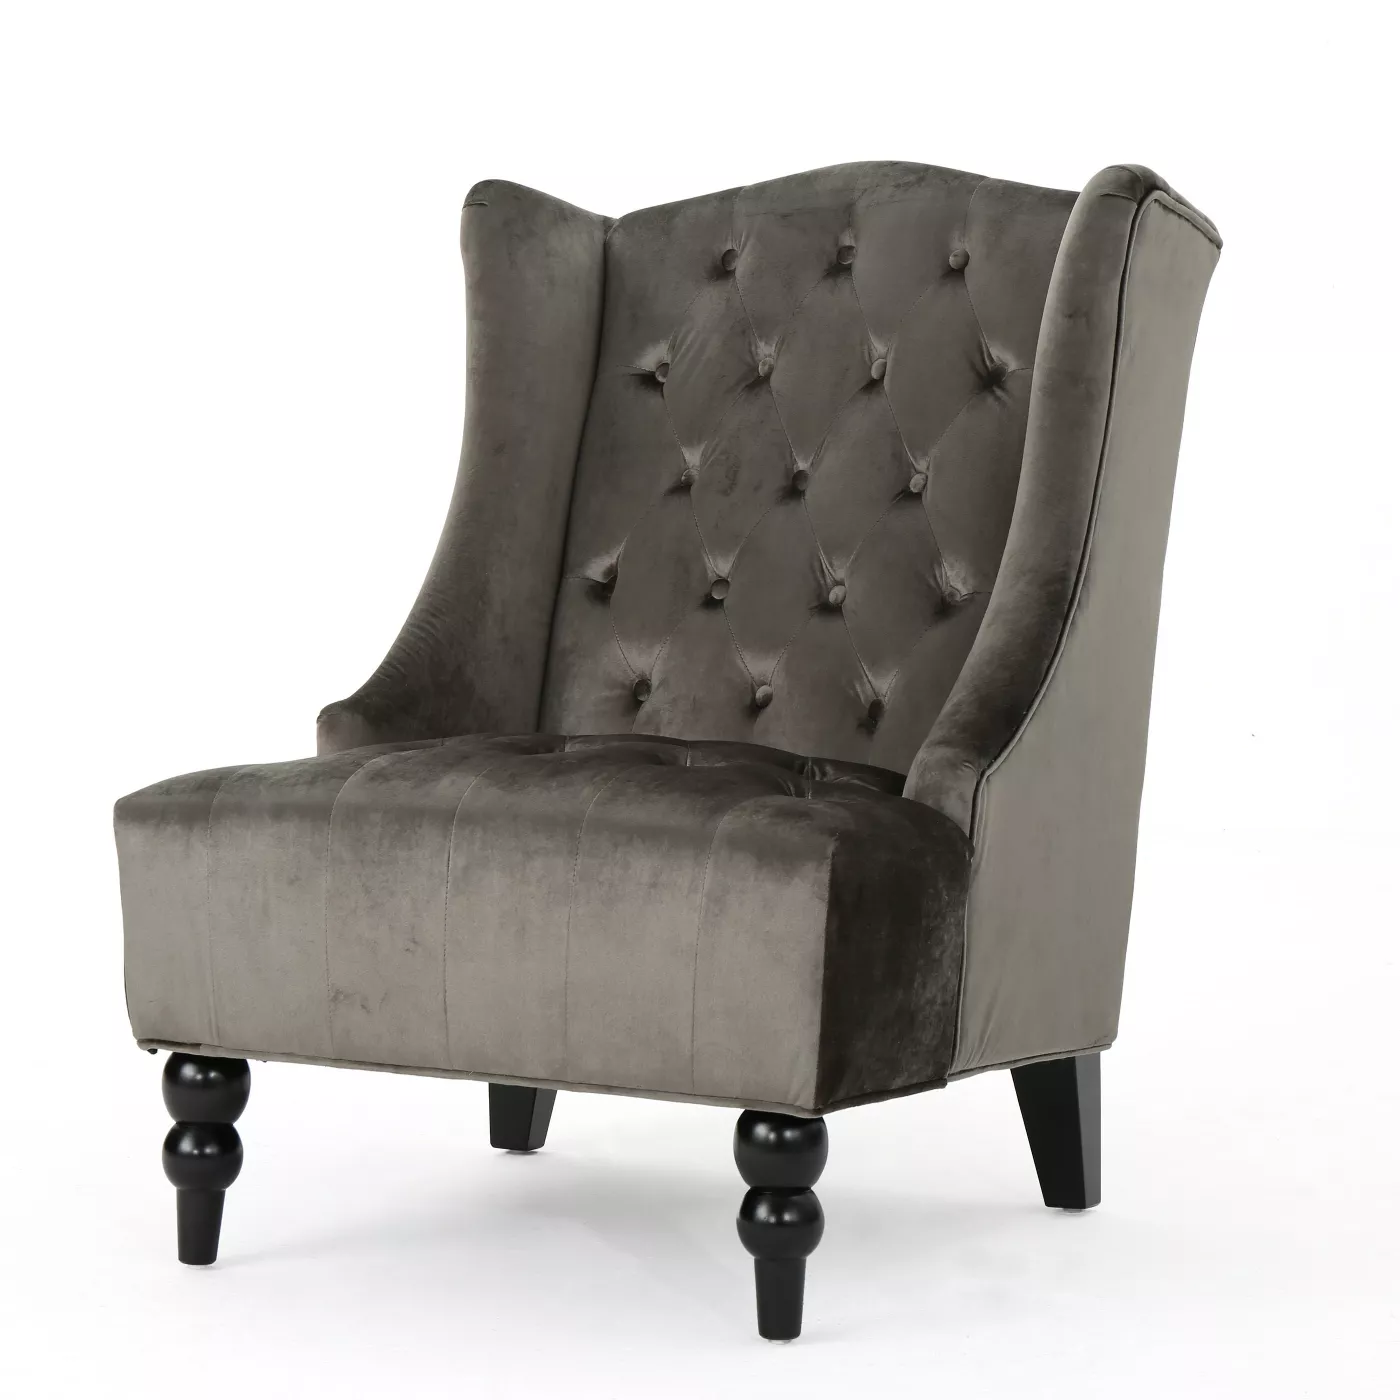 Toddman High-Back New Velvet Club Chair - Christopher Knight Home - image 1 of 4